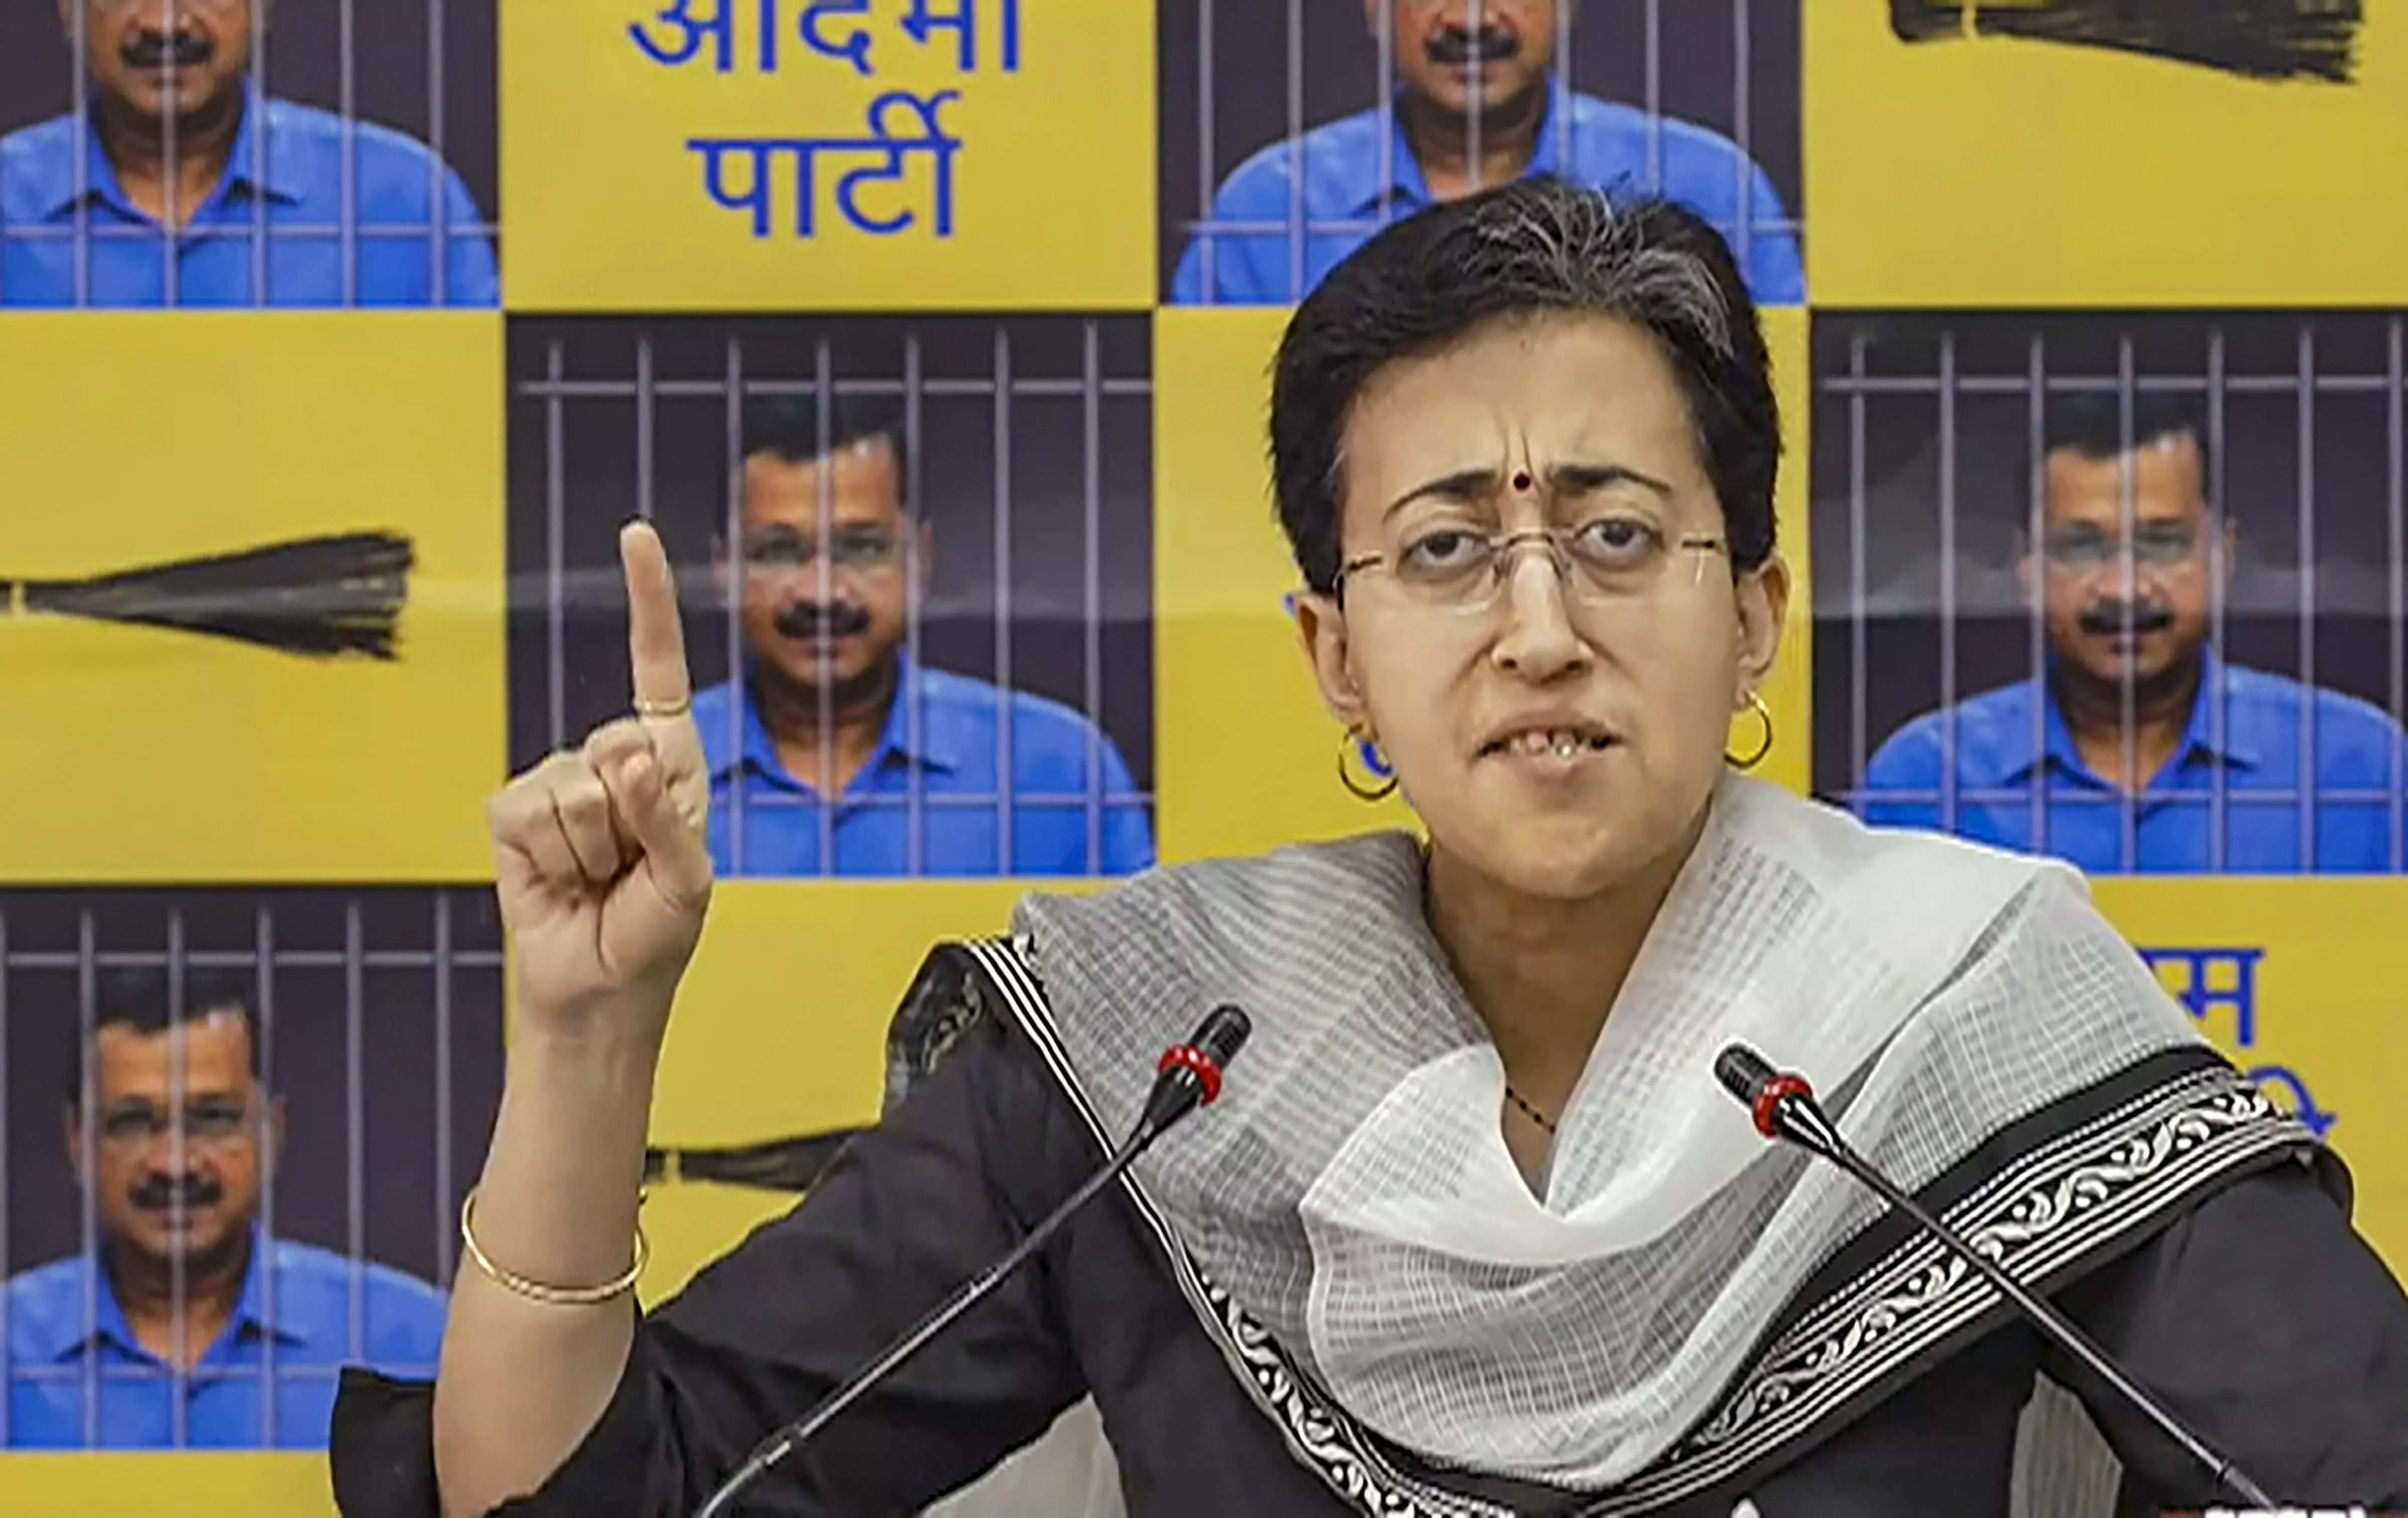 EC has banned partys LS poll campaign song, claims AAP leader Atishi